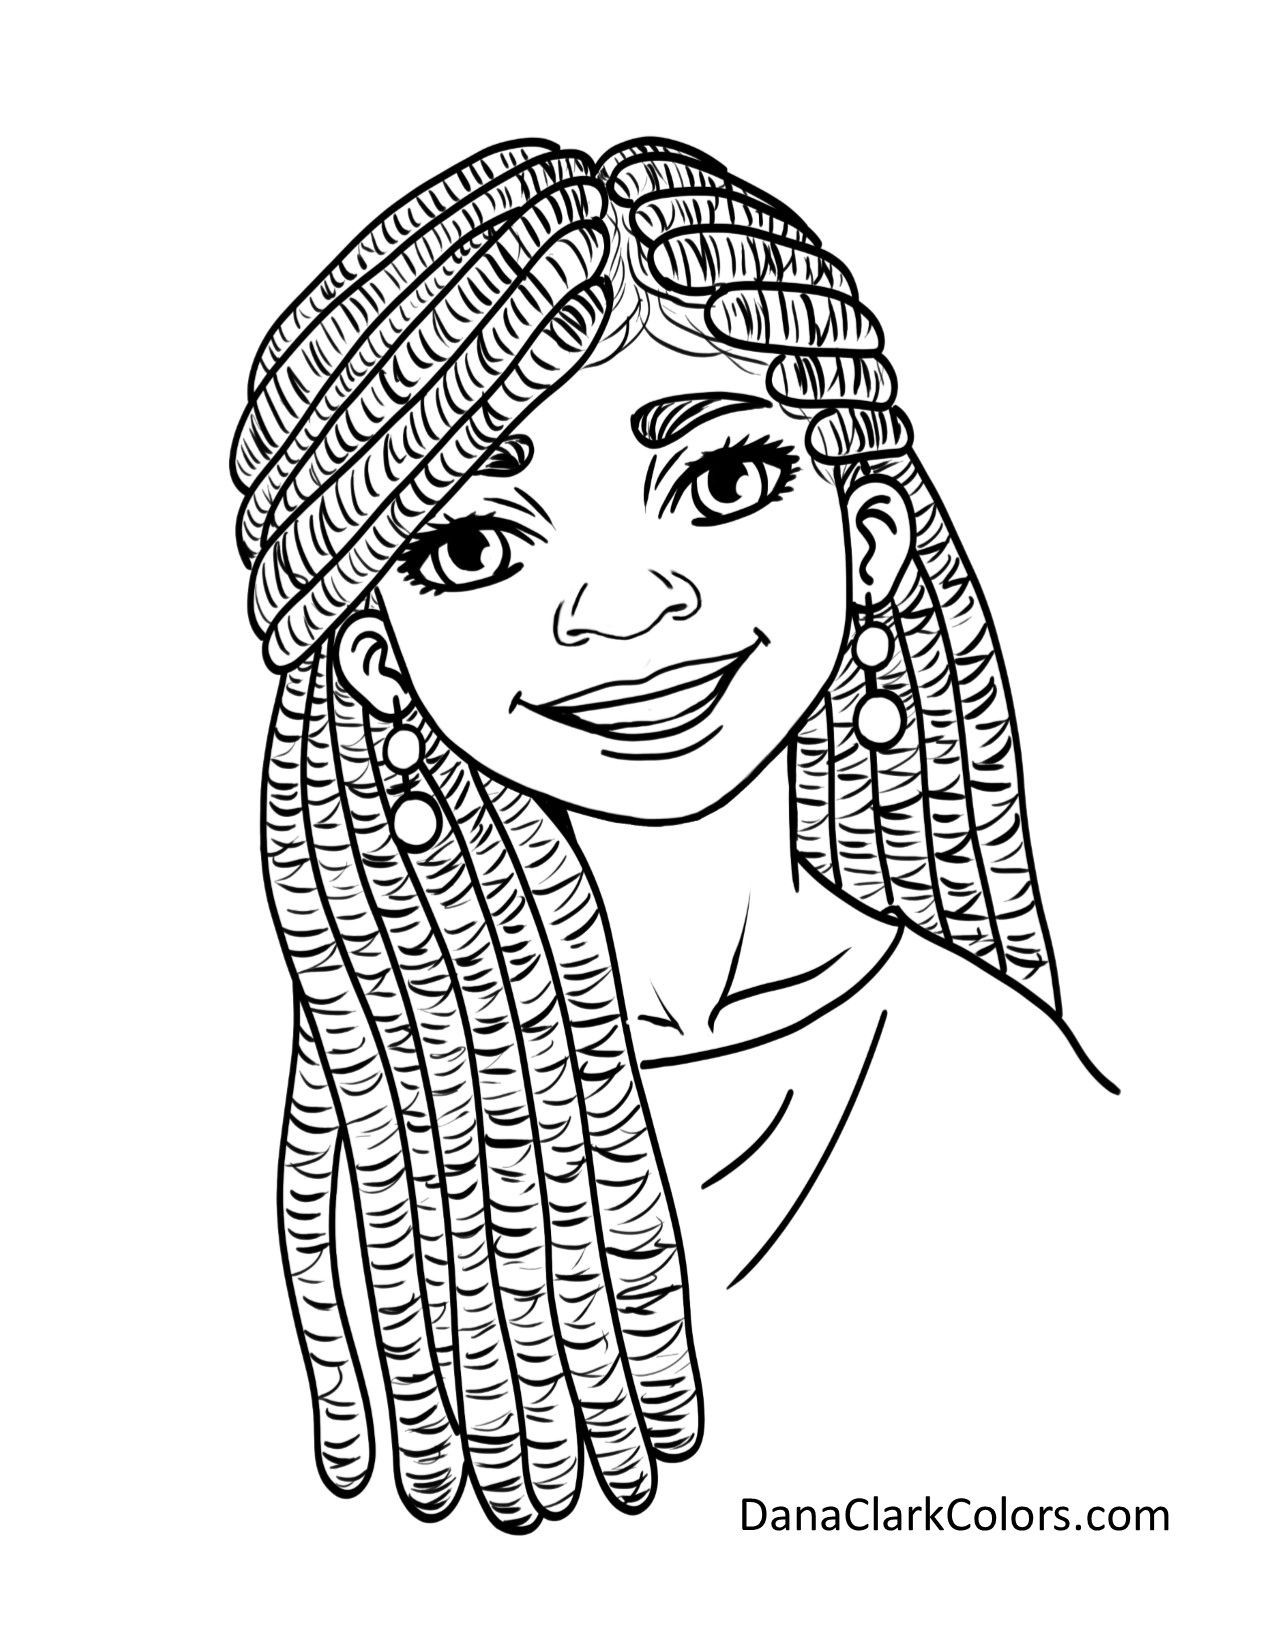 Black Girl Magic Coloring Pages
 Black Kids coloring page AfricanAmericanColoringPage